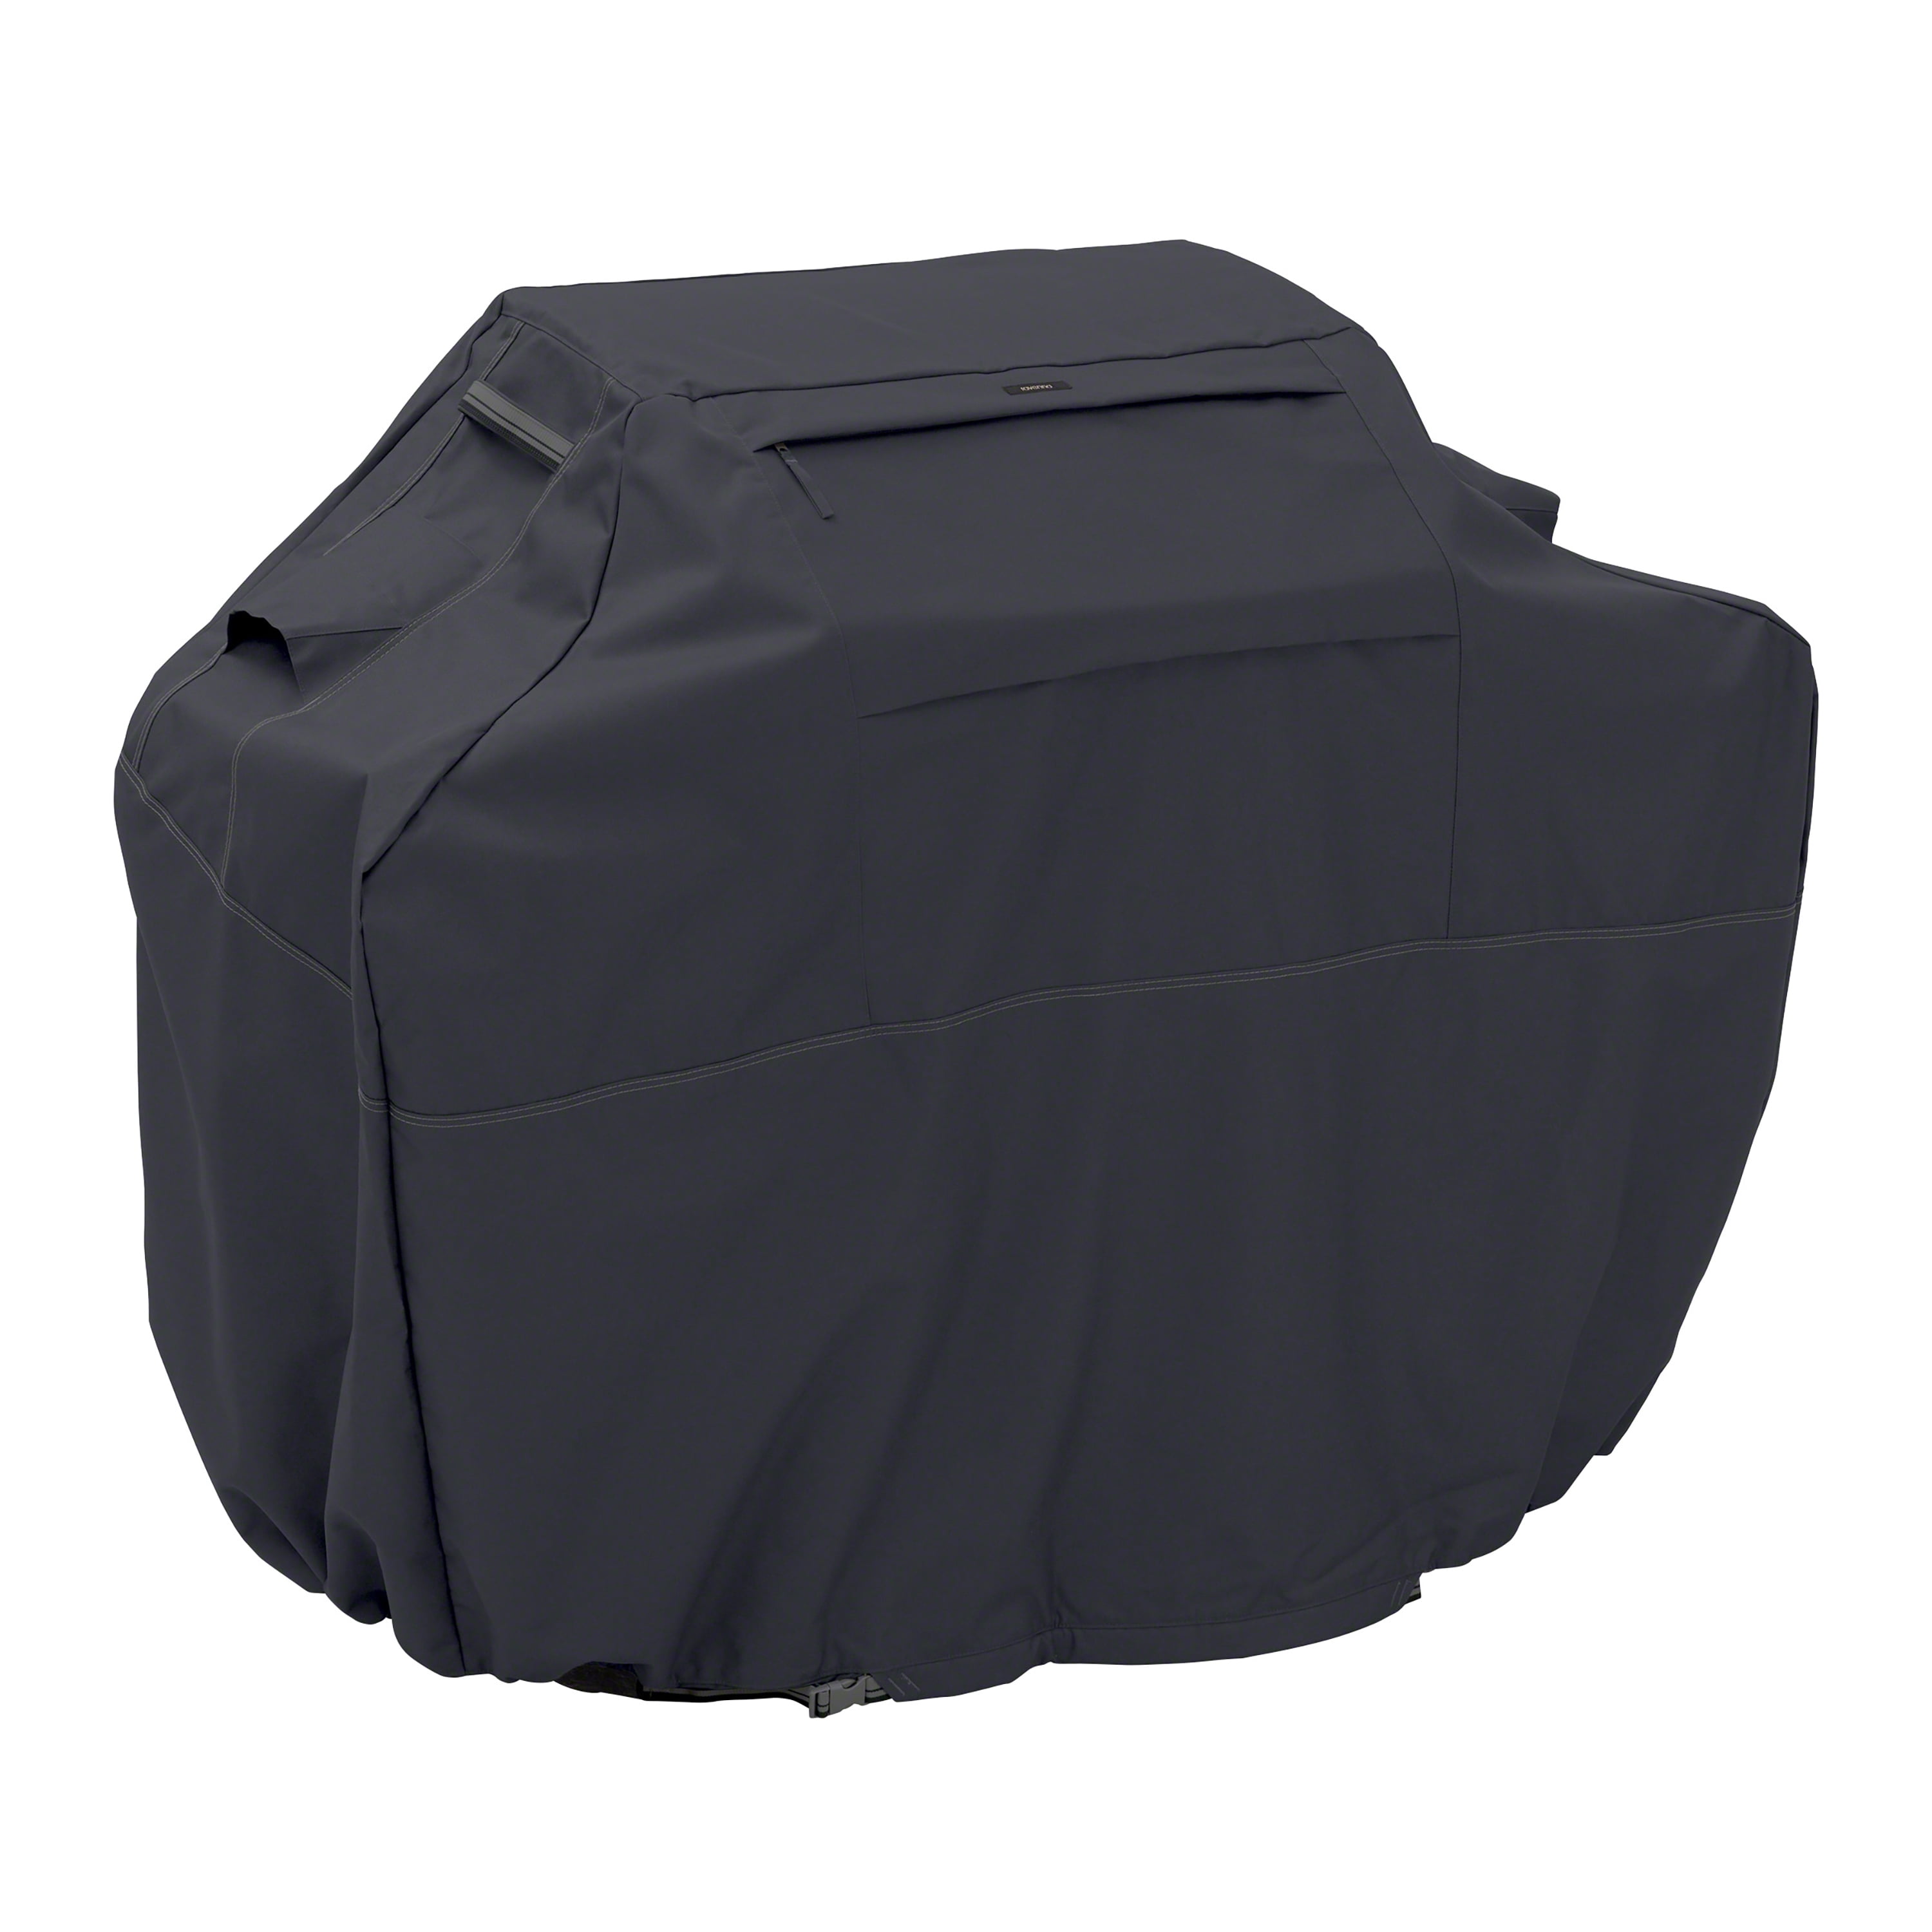 Weber and other brands Veranda BBQ Barbecue Grill Cover Medium Fits Outback 